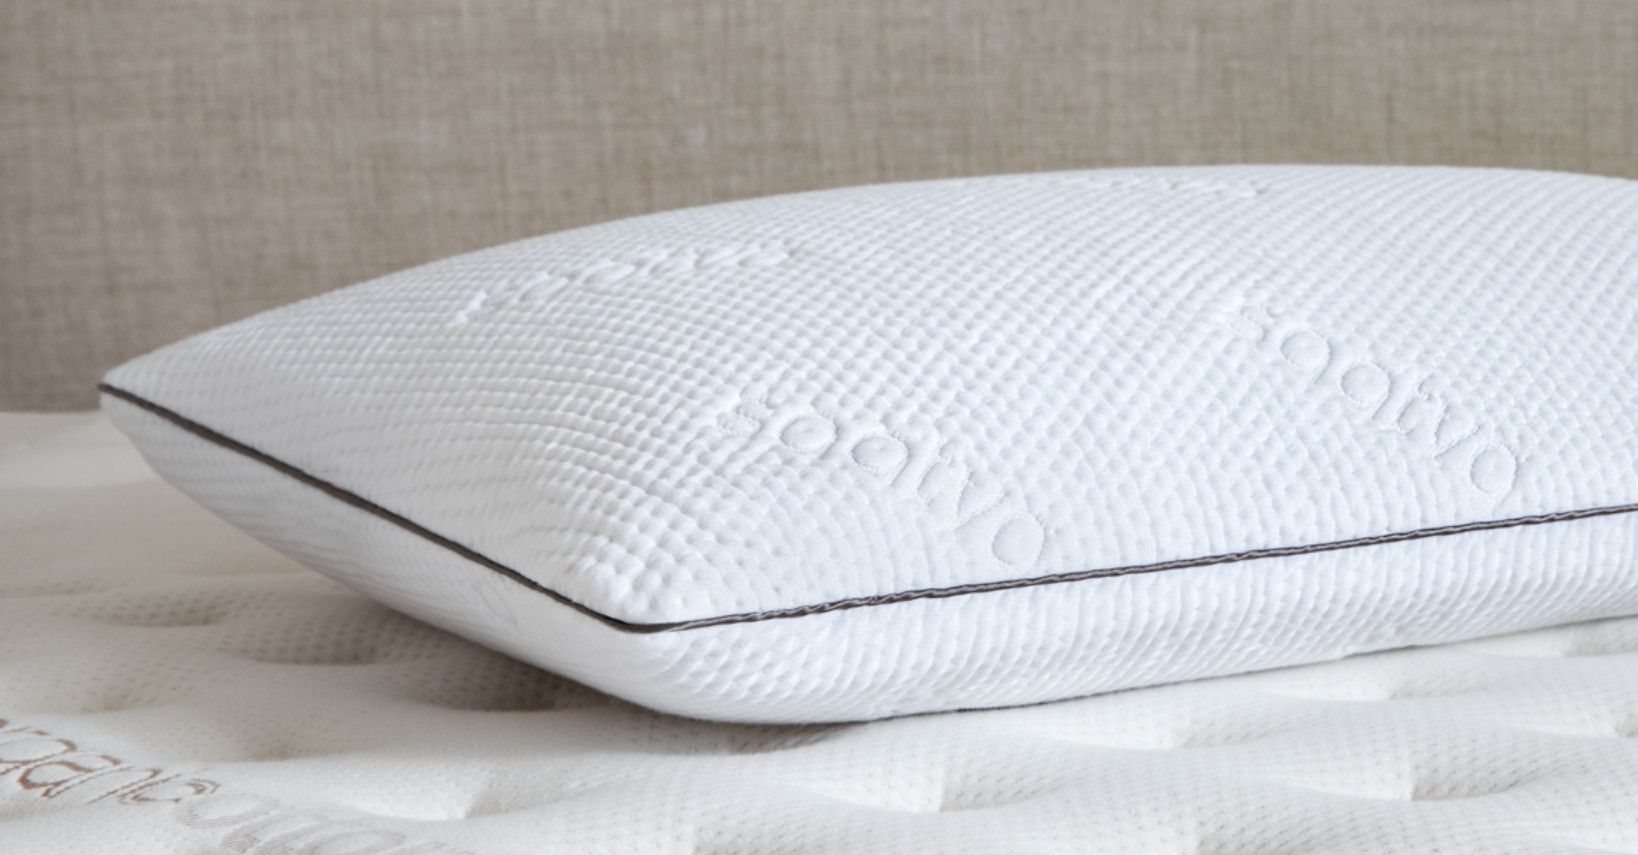 are the foam pillows from saatva comfortable?